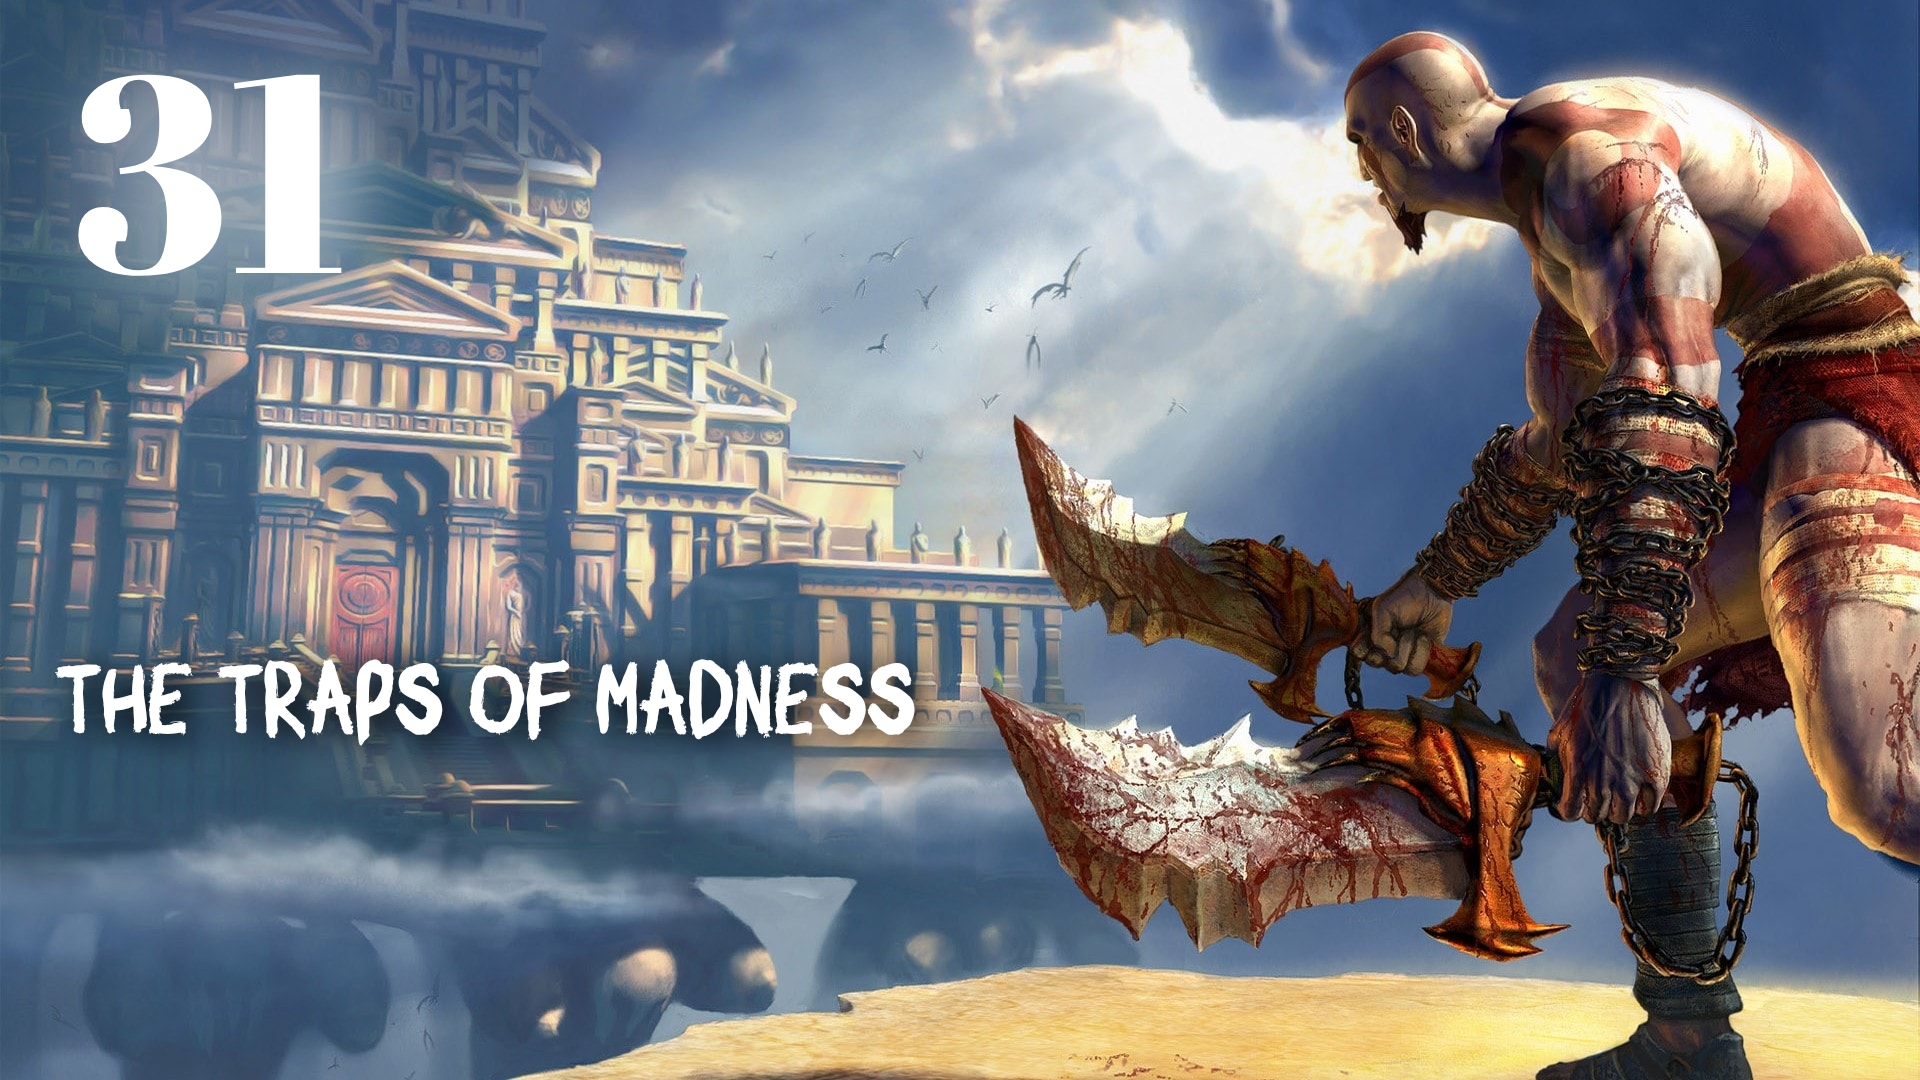 God of War HD The Cliffs of Madness: The Traps of Madness